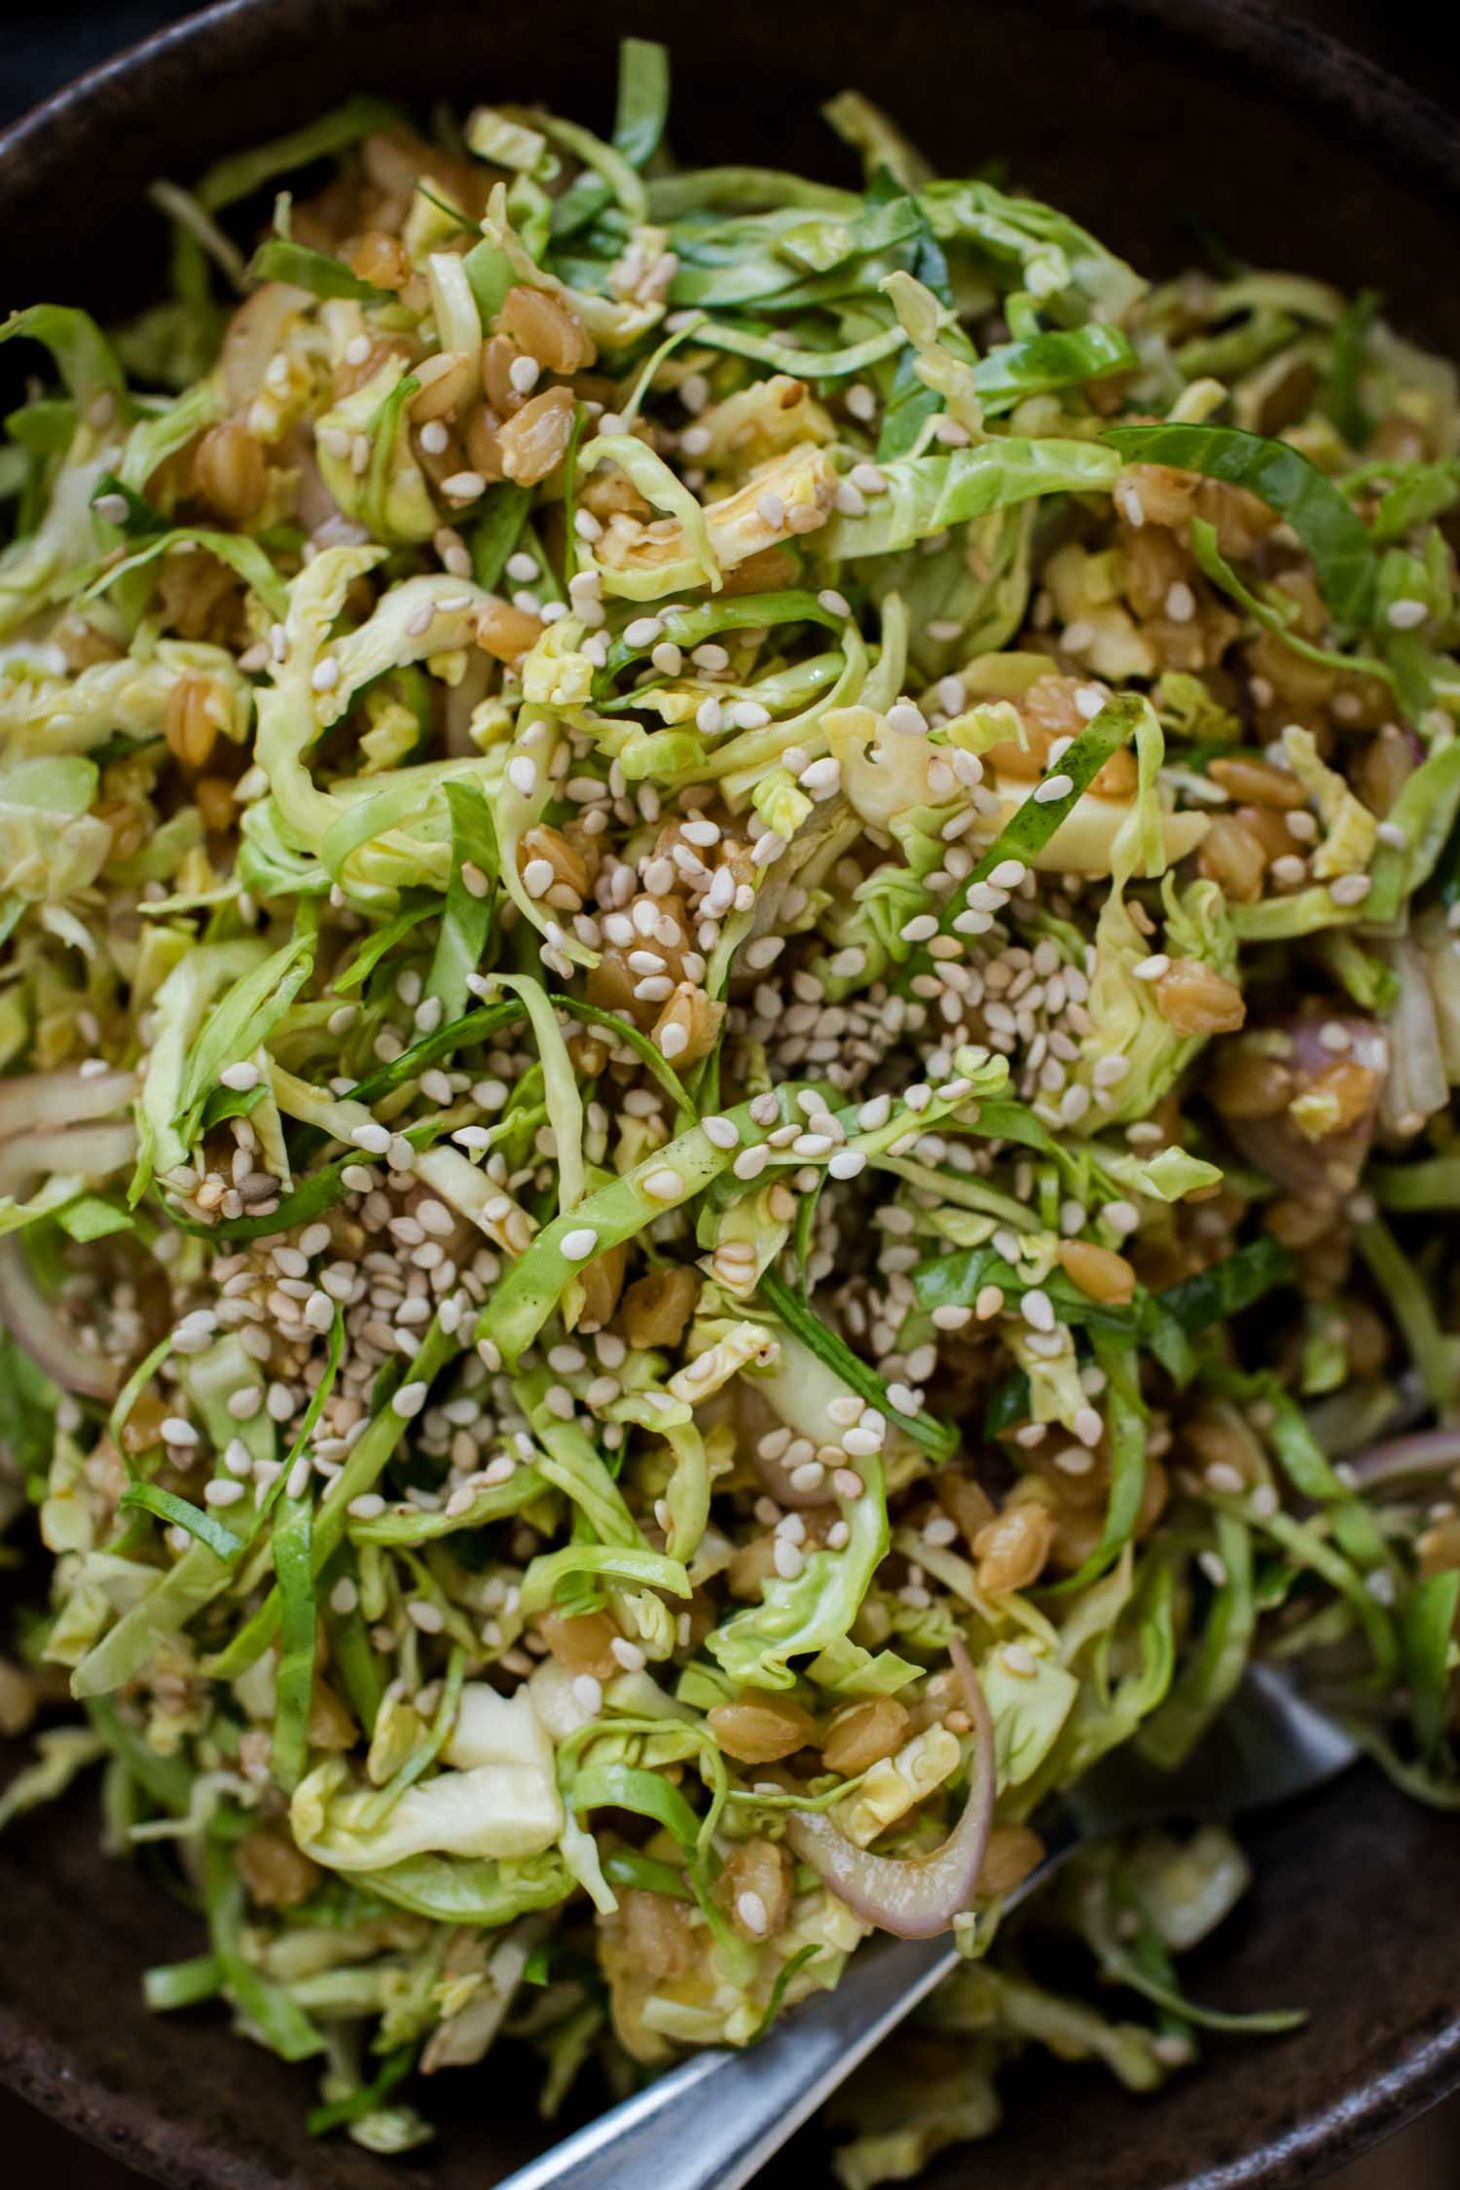 Shaved Brussels Sprout Salad with Einkorn and Soy-Mustard Dressing